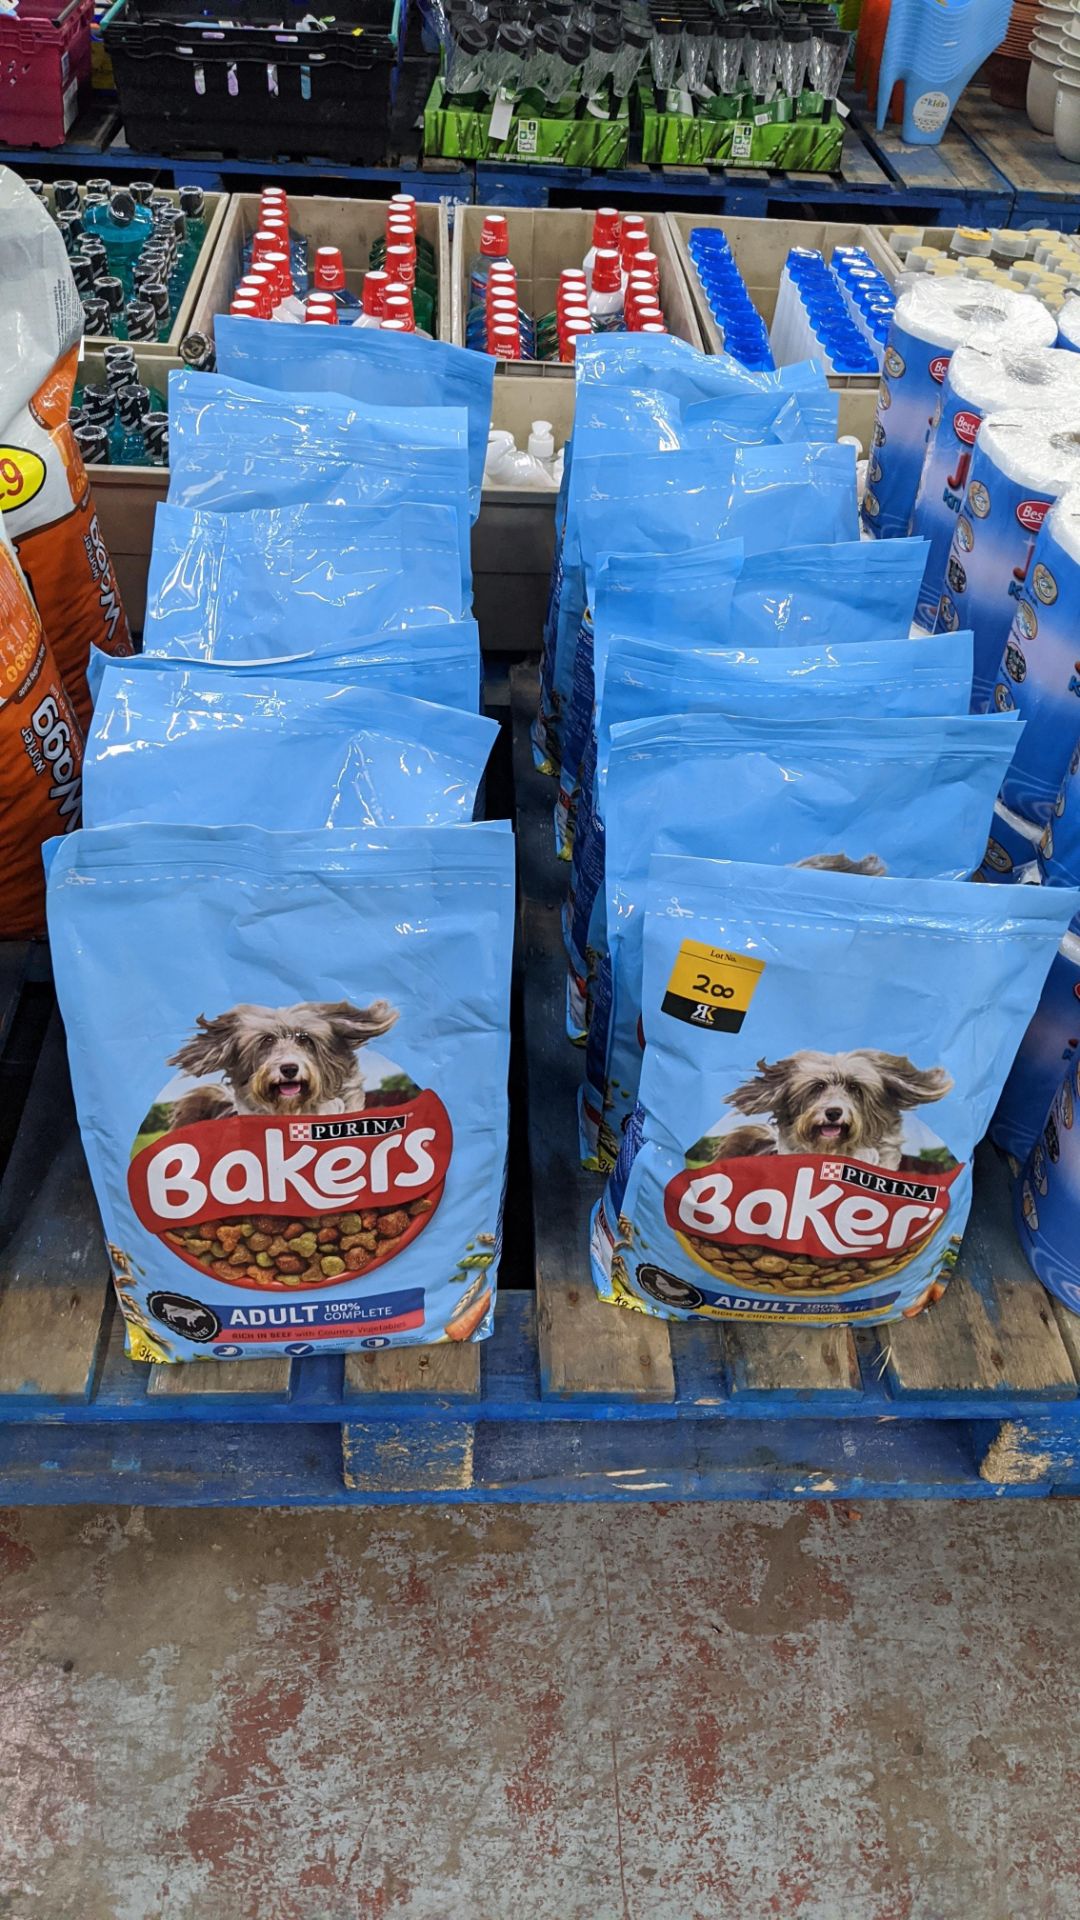 14 off 3kg sacks of Purina Bakers Adult dog food NB. Some of the bags have cuts in the top .